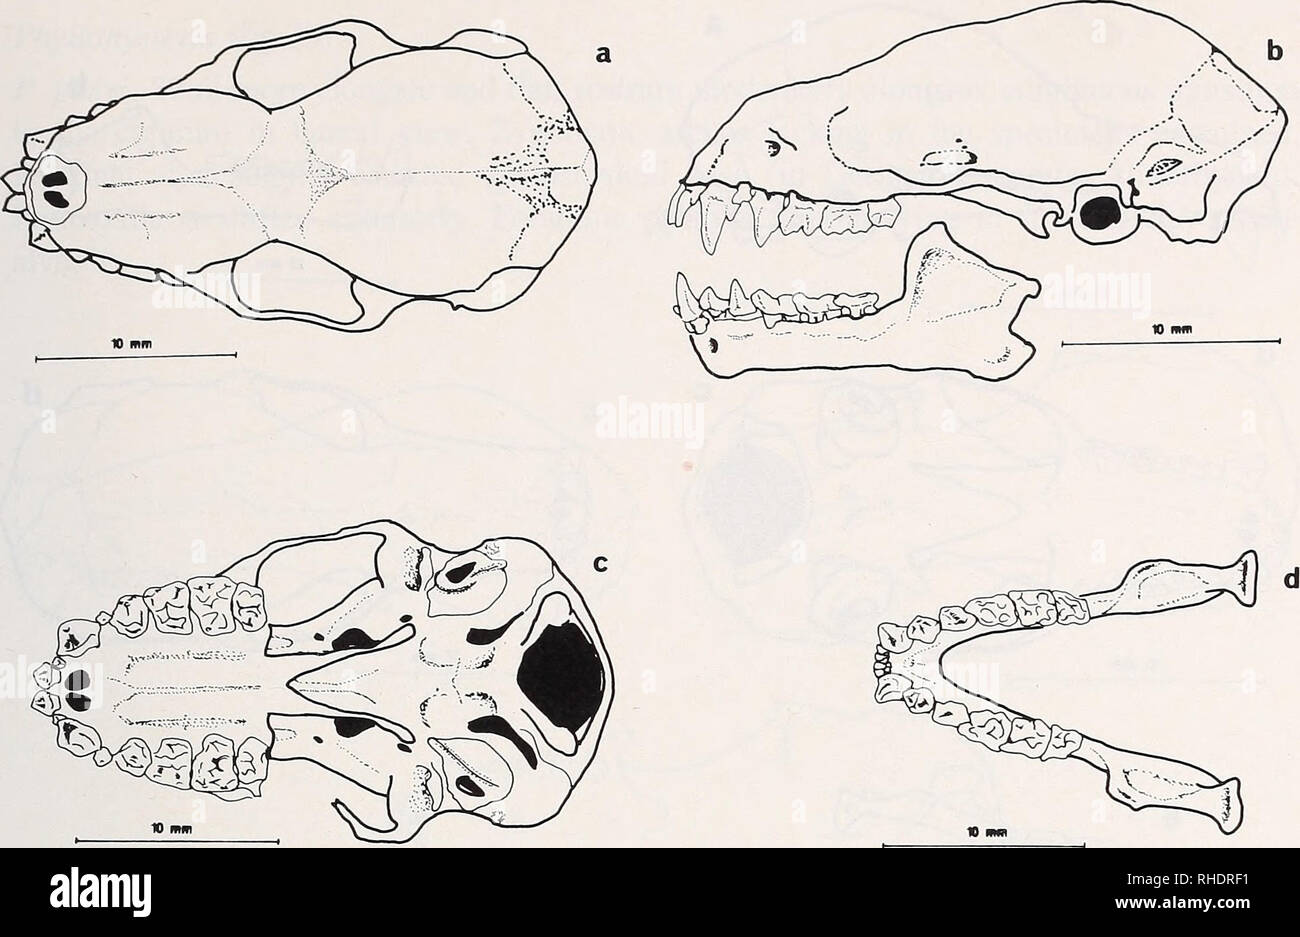 . Bonner zoologische Monographien. Zoology. 49. Fig.30: Brachyphylla nana, a: skull dorsal view, b: skull lateral view, c: skull basal view, d: mandible top view Inner upper incisivi invigorates with pointed edge, outer incisors very small &quot;squeezed into the gap between the large incisivi and the canine tooth&quot;; caninus strong but only slightly longer than incisivi, anterior upper premolar very small, closely adjacent to canine tooth and to posterior premolars. Posterior premolar very strong, pointed and almost tlie same size as canine tooth. Upper molars broad with multiple cusps, la Stock Photo